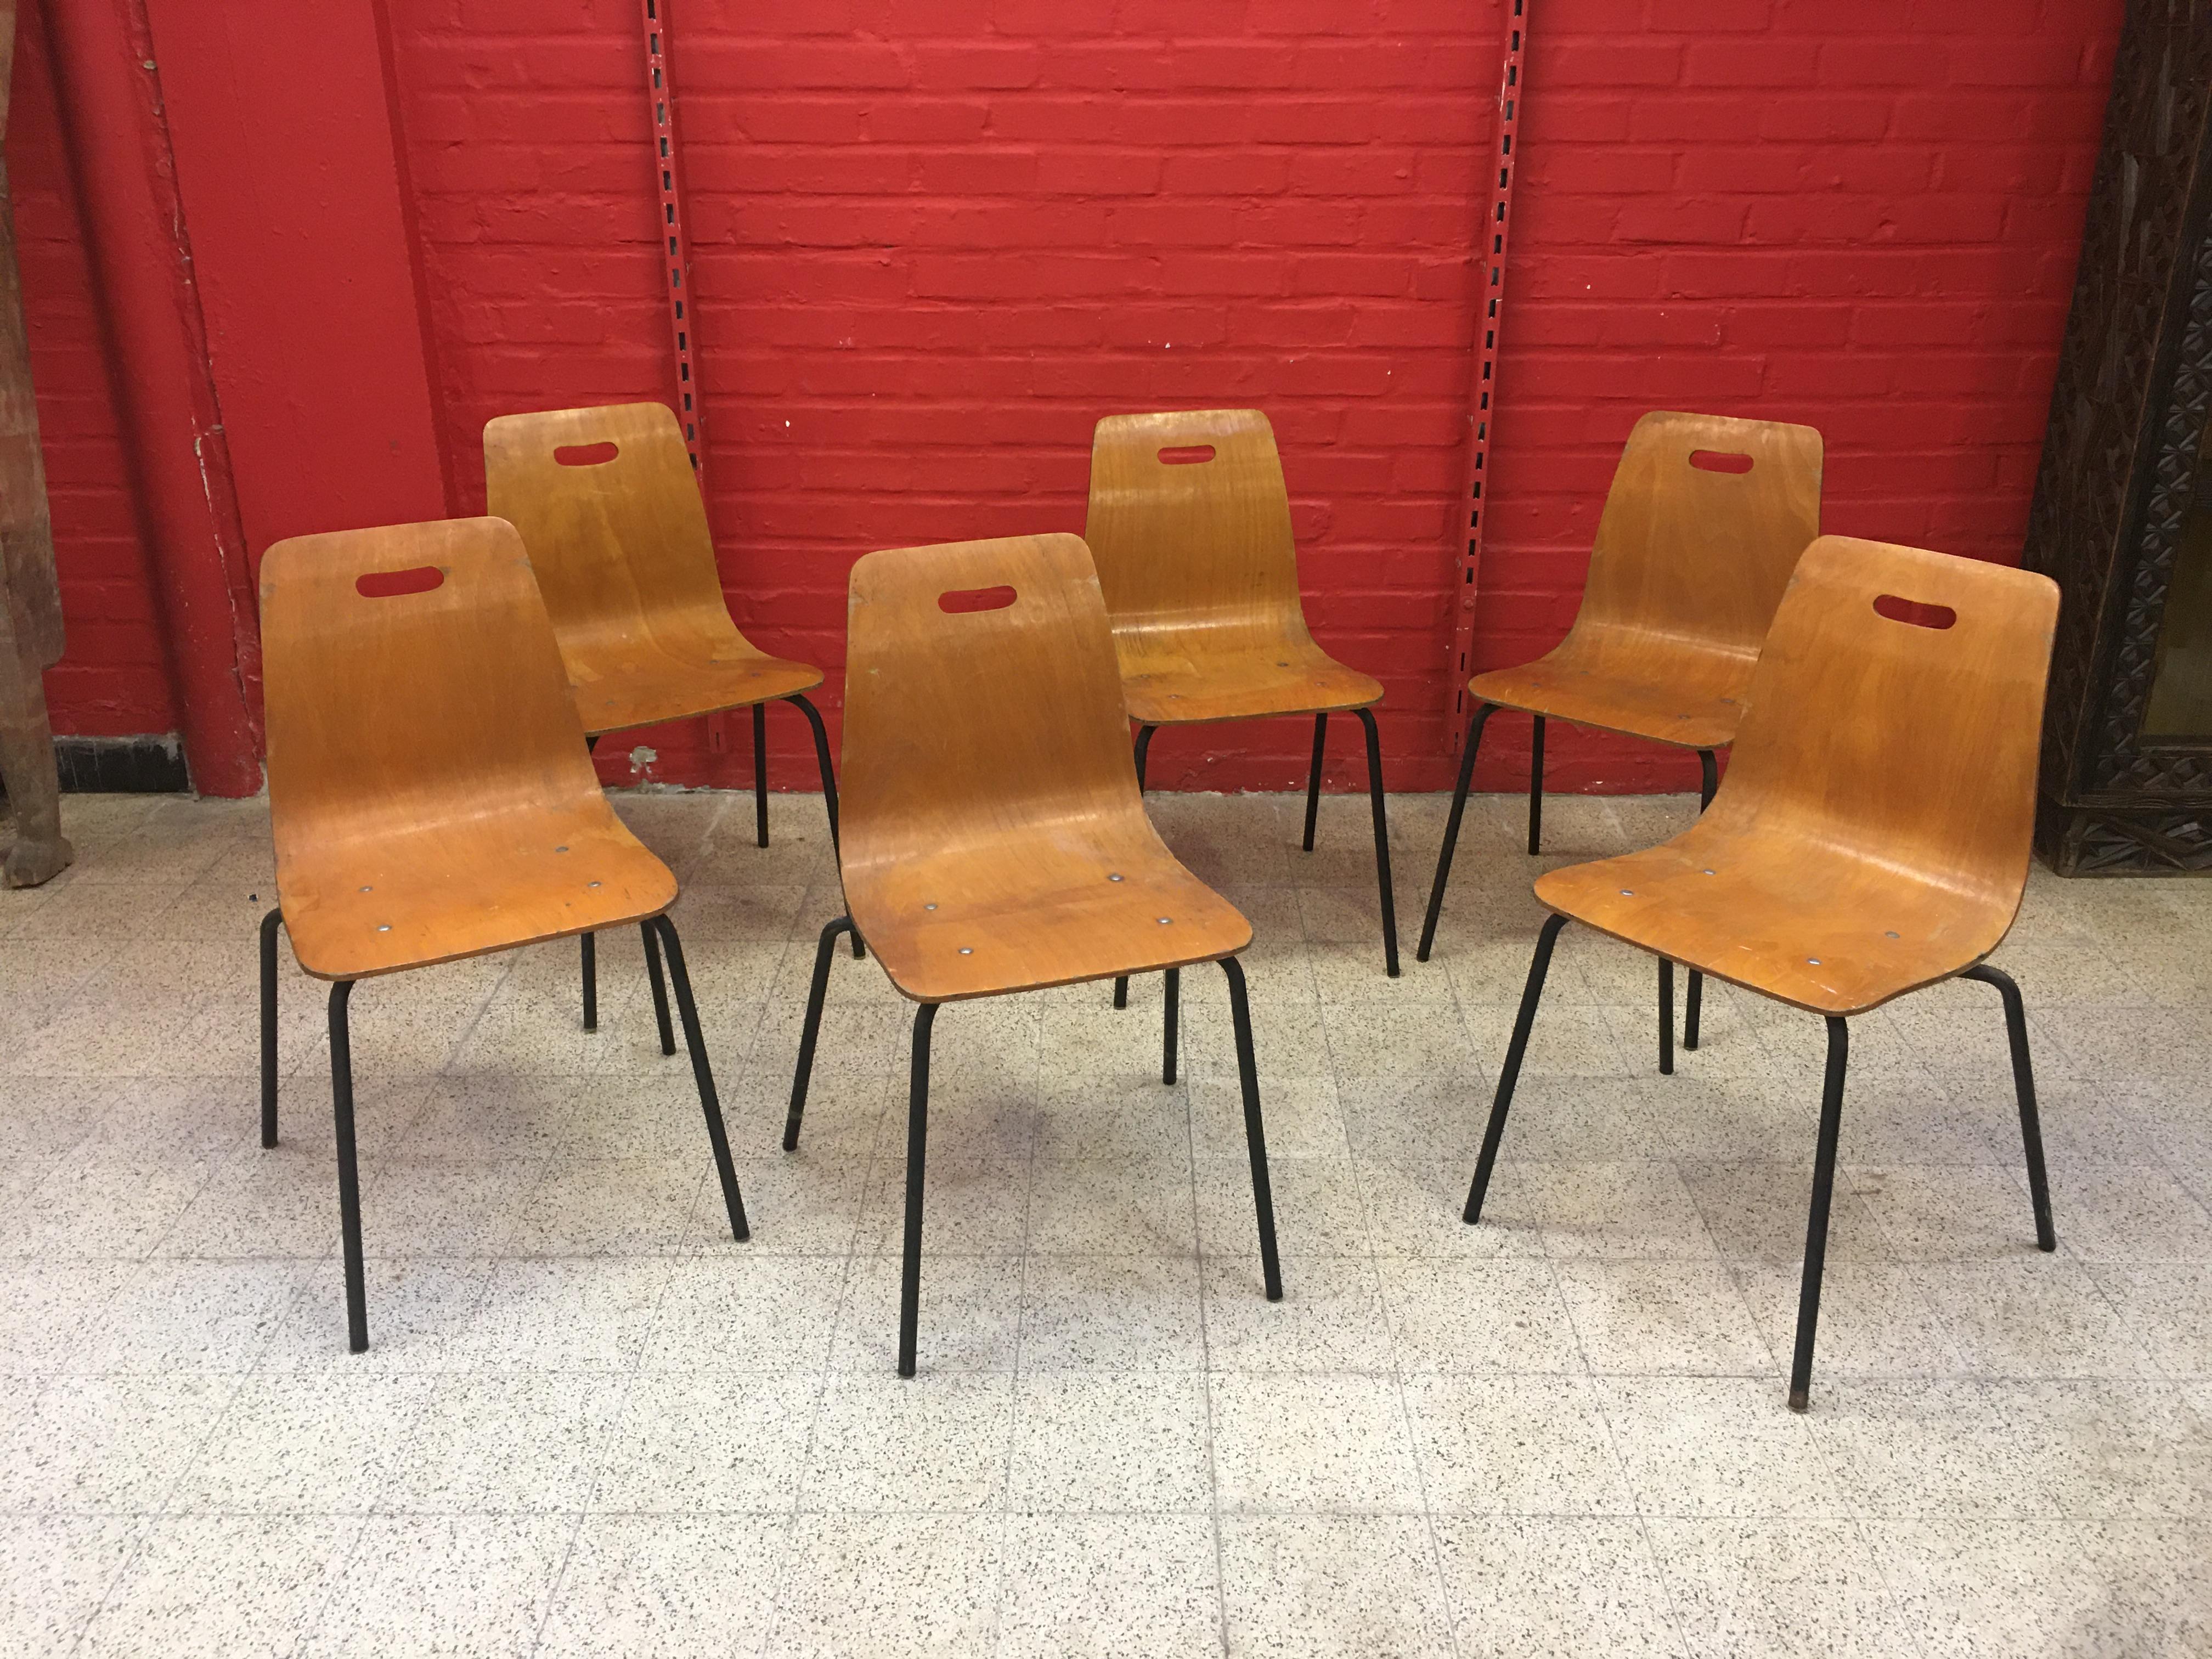 Typical French design, circa 1950,
Thermoformed wood and lacquered metal.
Stackable chairs
Many blows and wear.
 